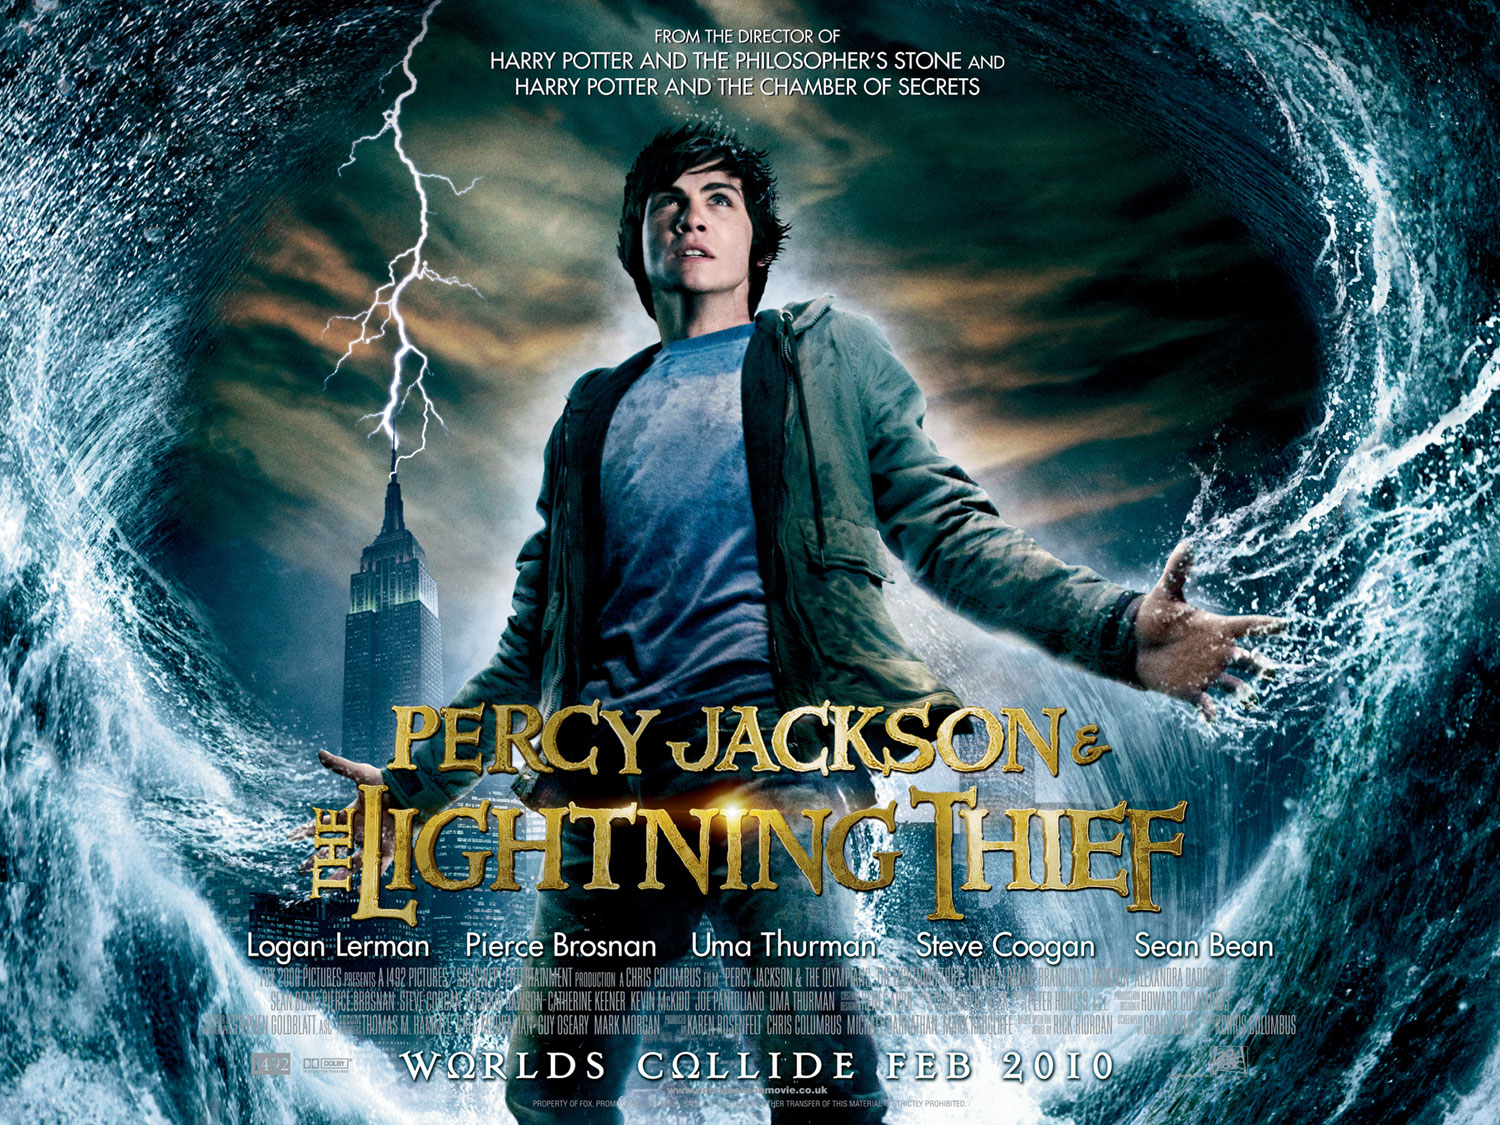 High Resolution Wallpaper | Percy Jackson & The Olympians: The Lightning Thief 1500x1125 px